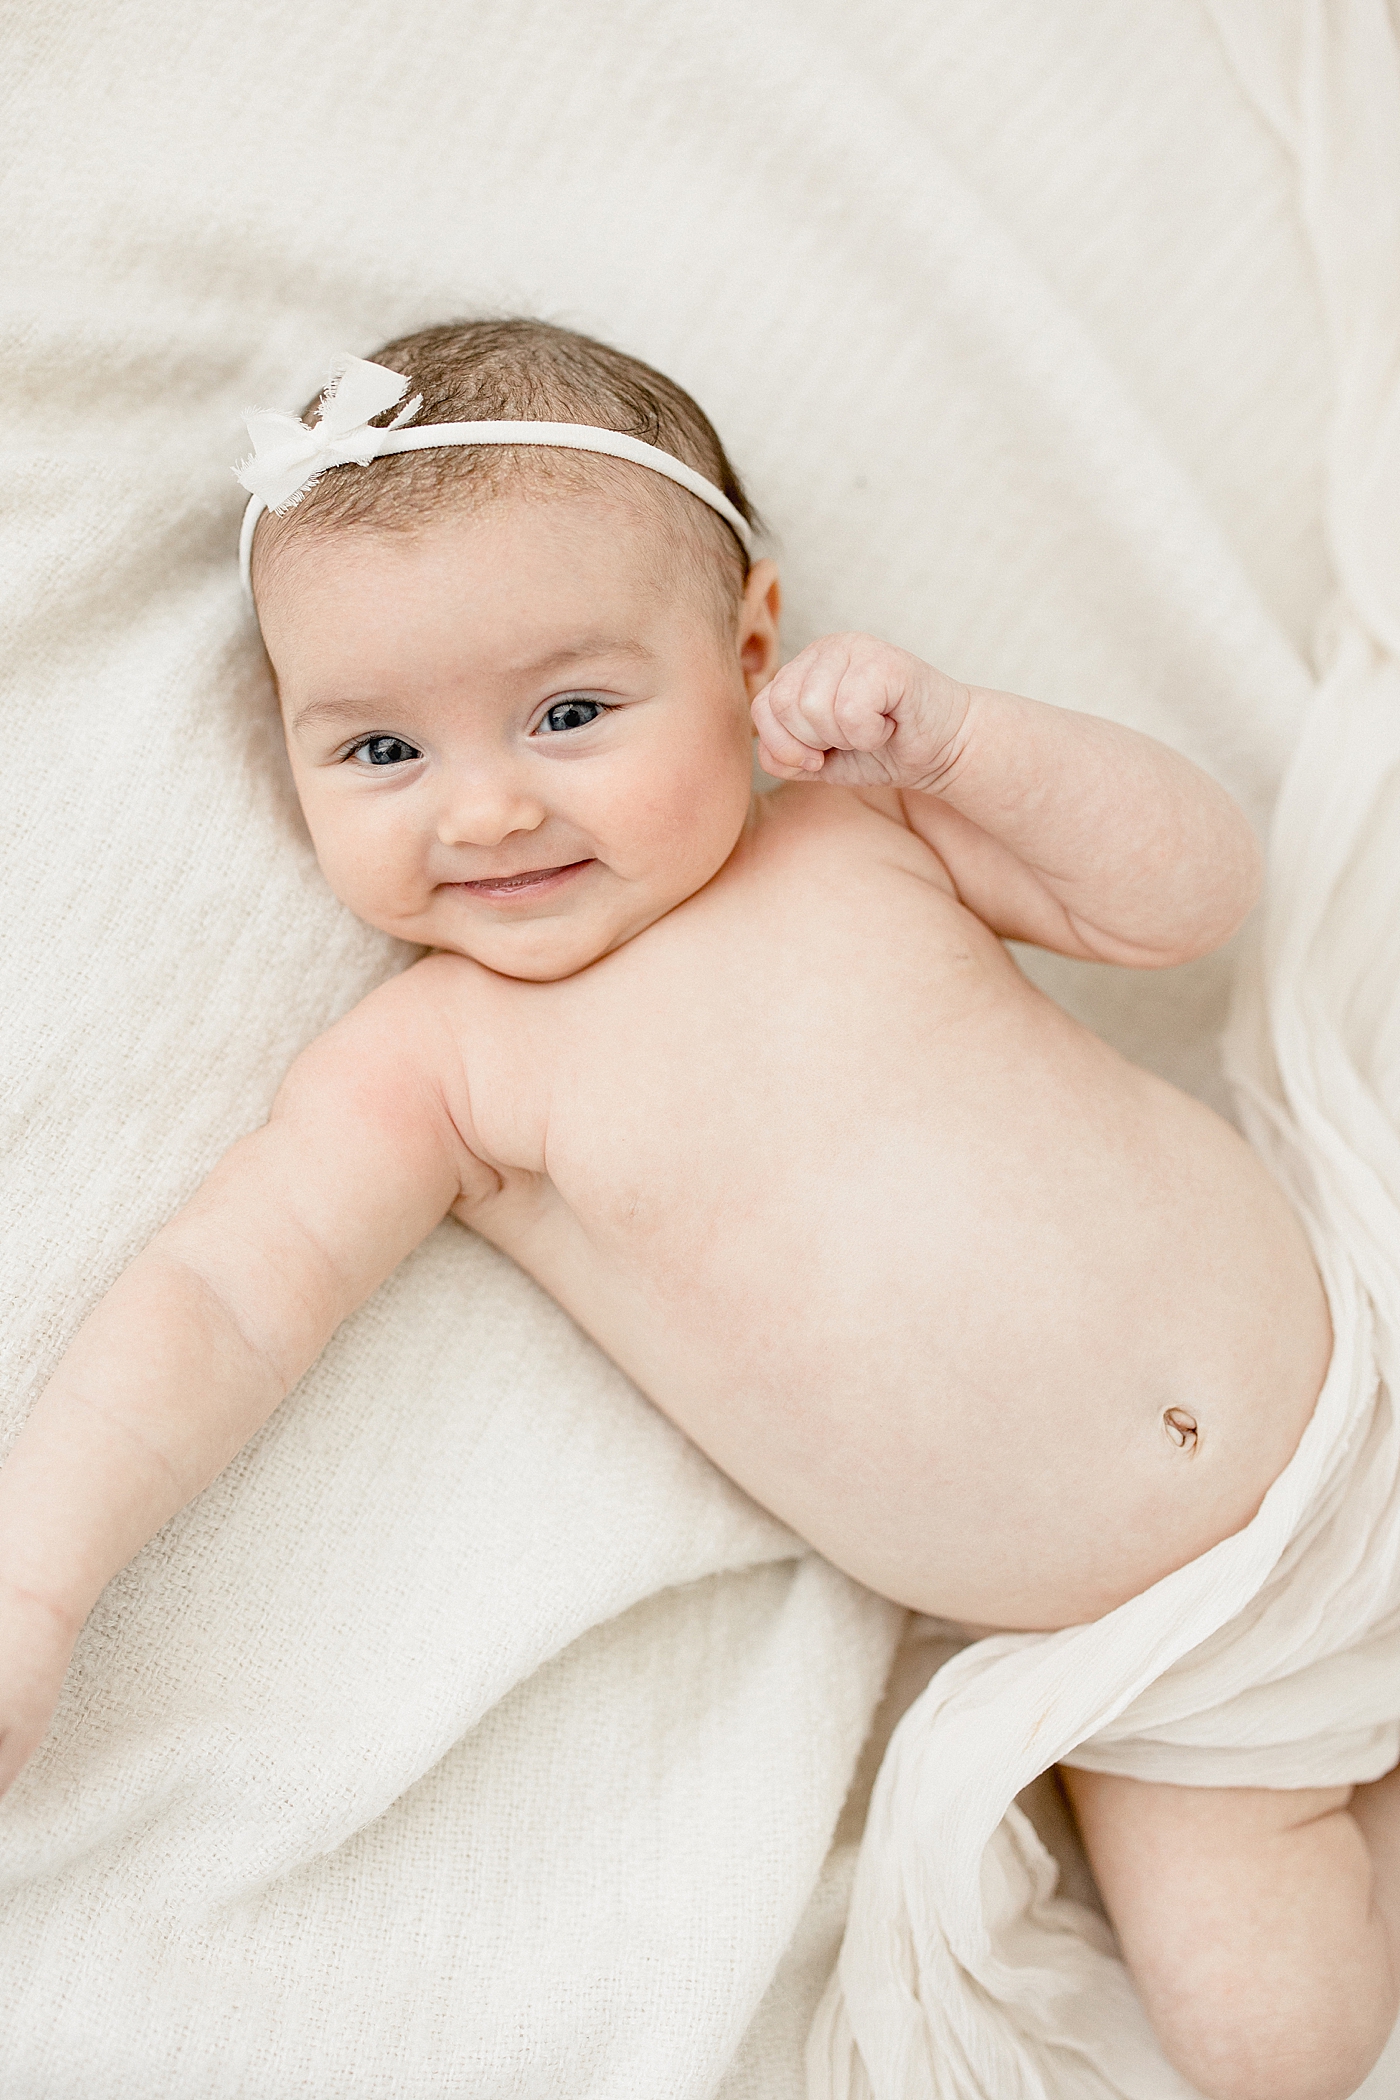 3 month milestone simplicity session in studio for baby girl. Photo by Brittany Elise Photography.